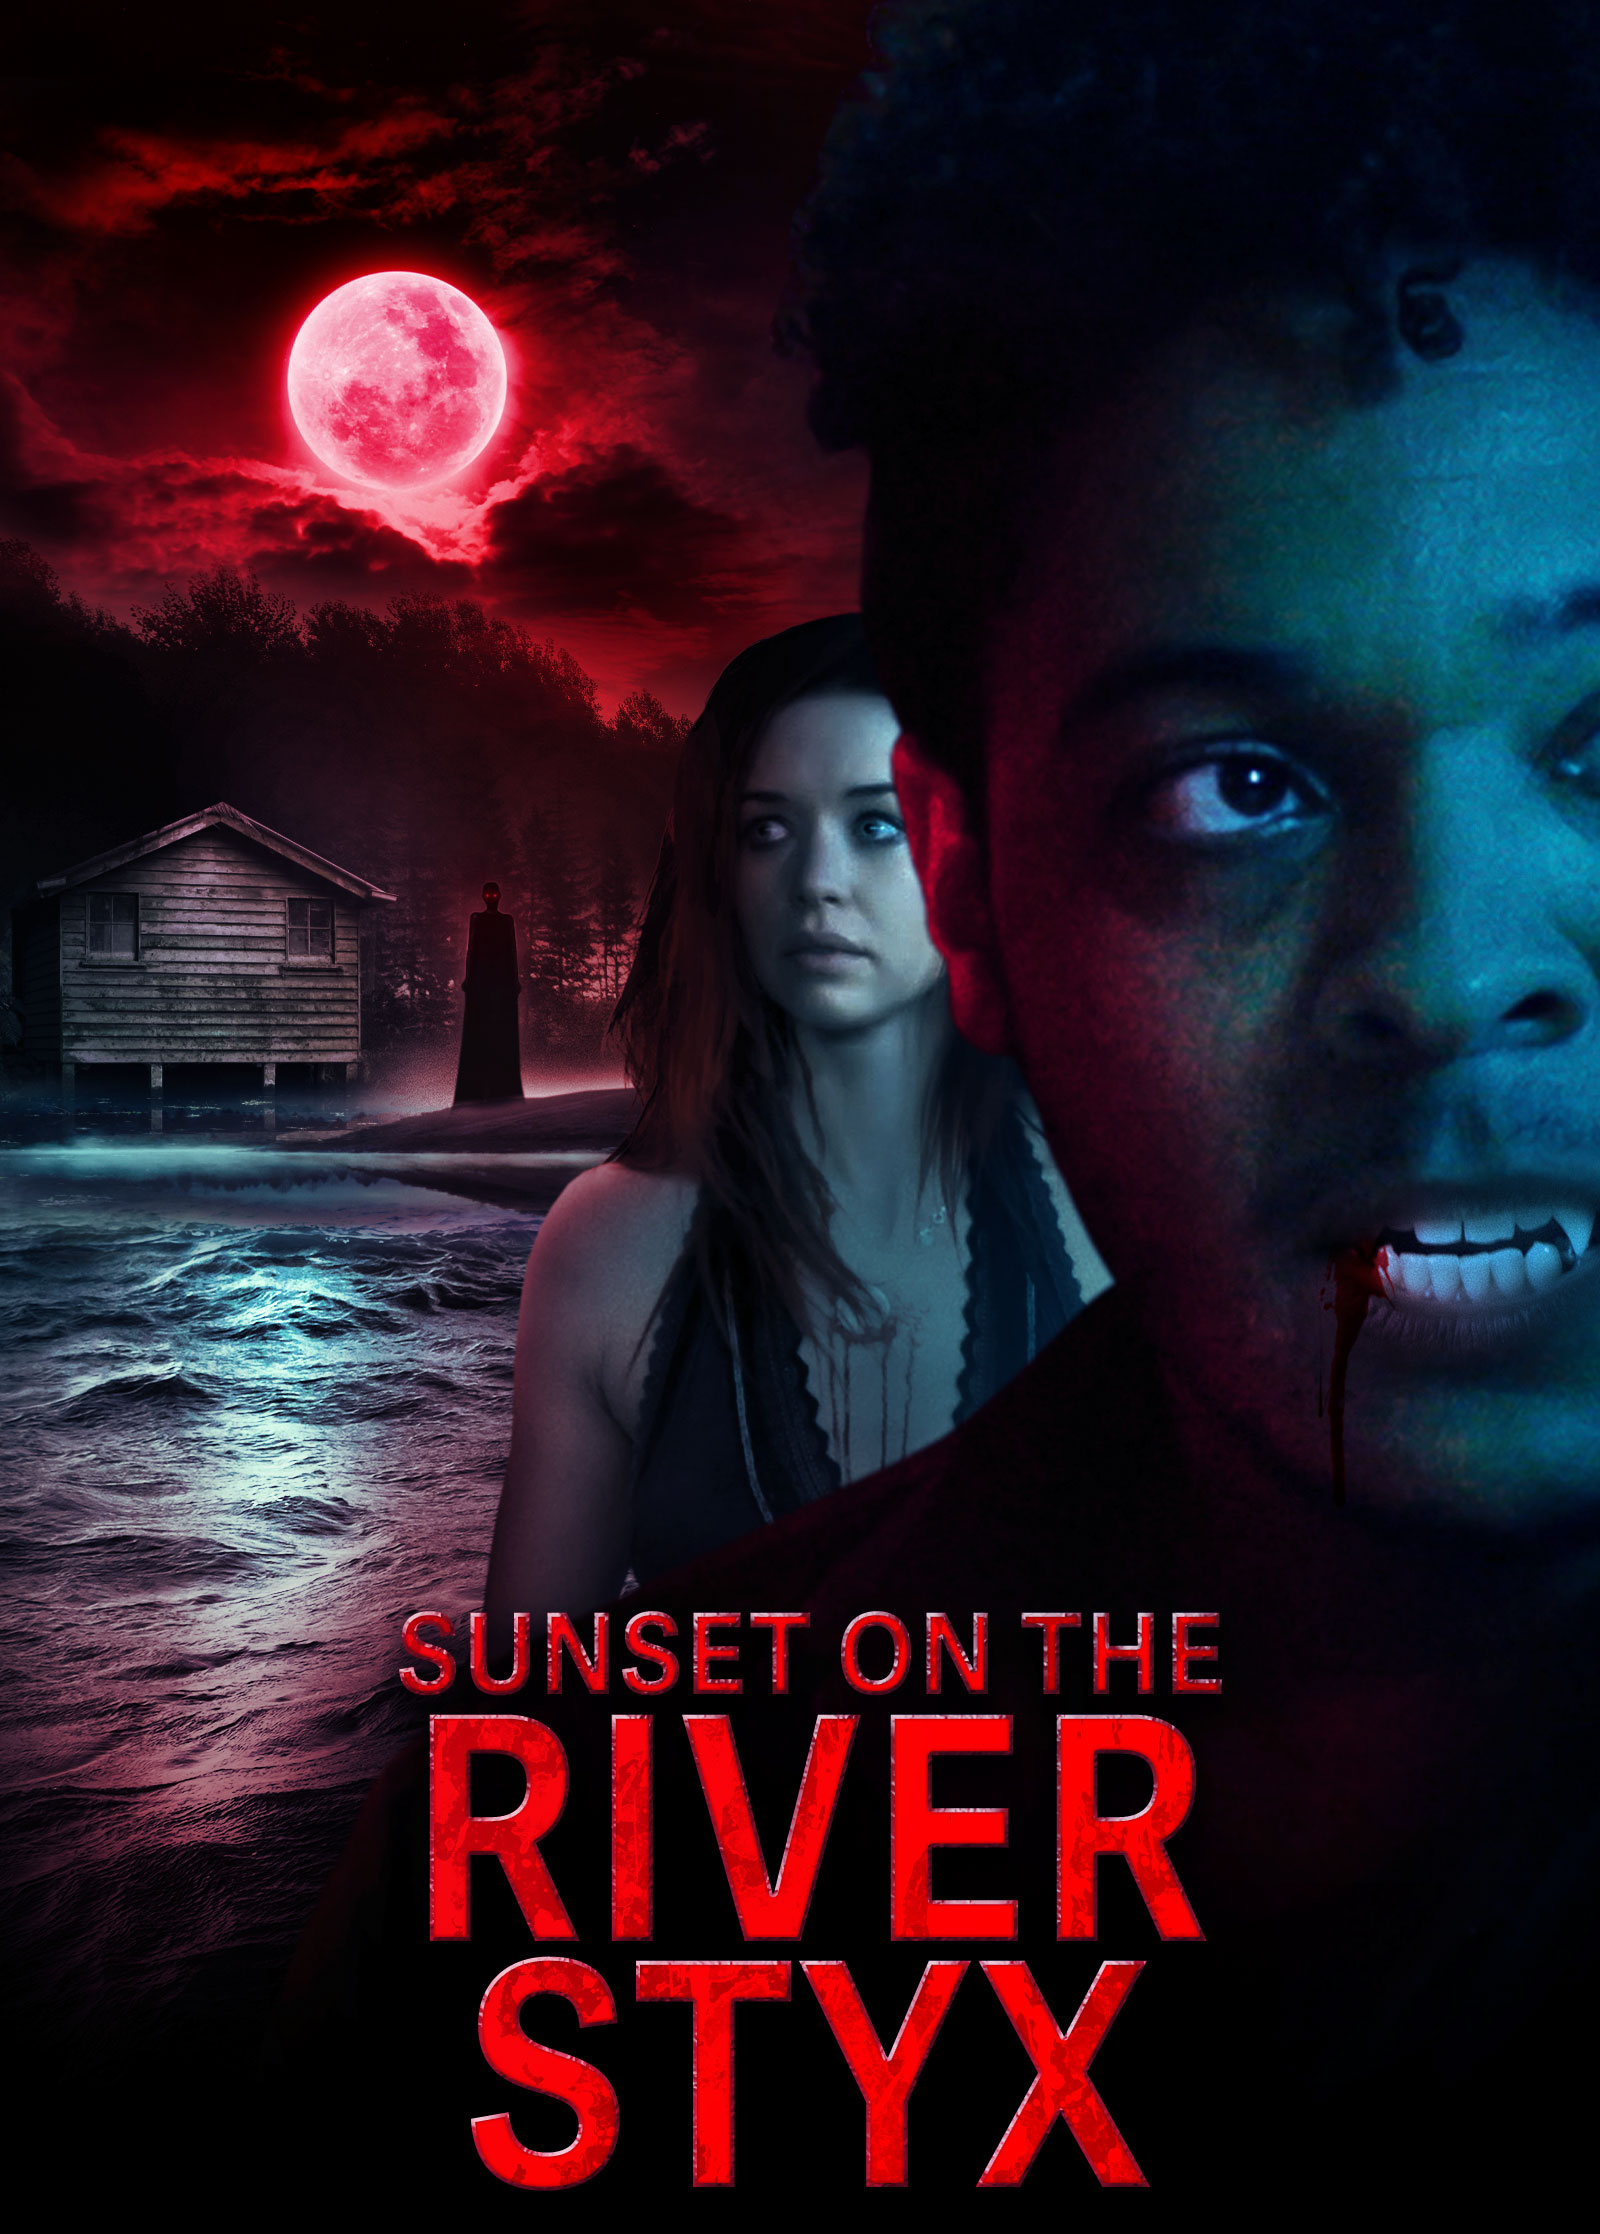 Sunset on the River Styx (2018)